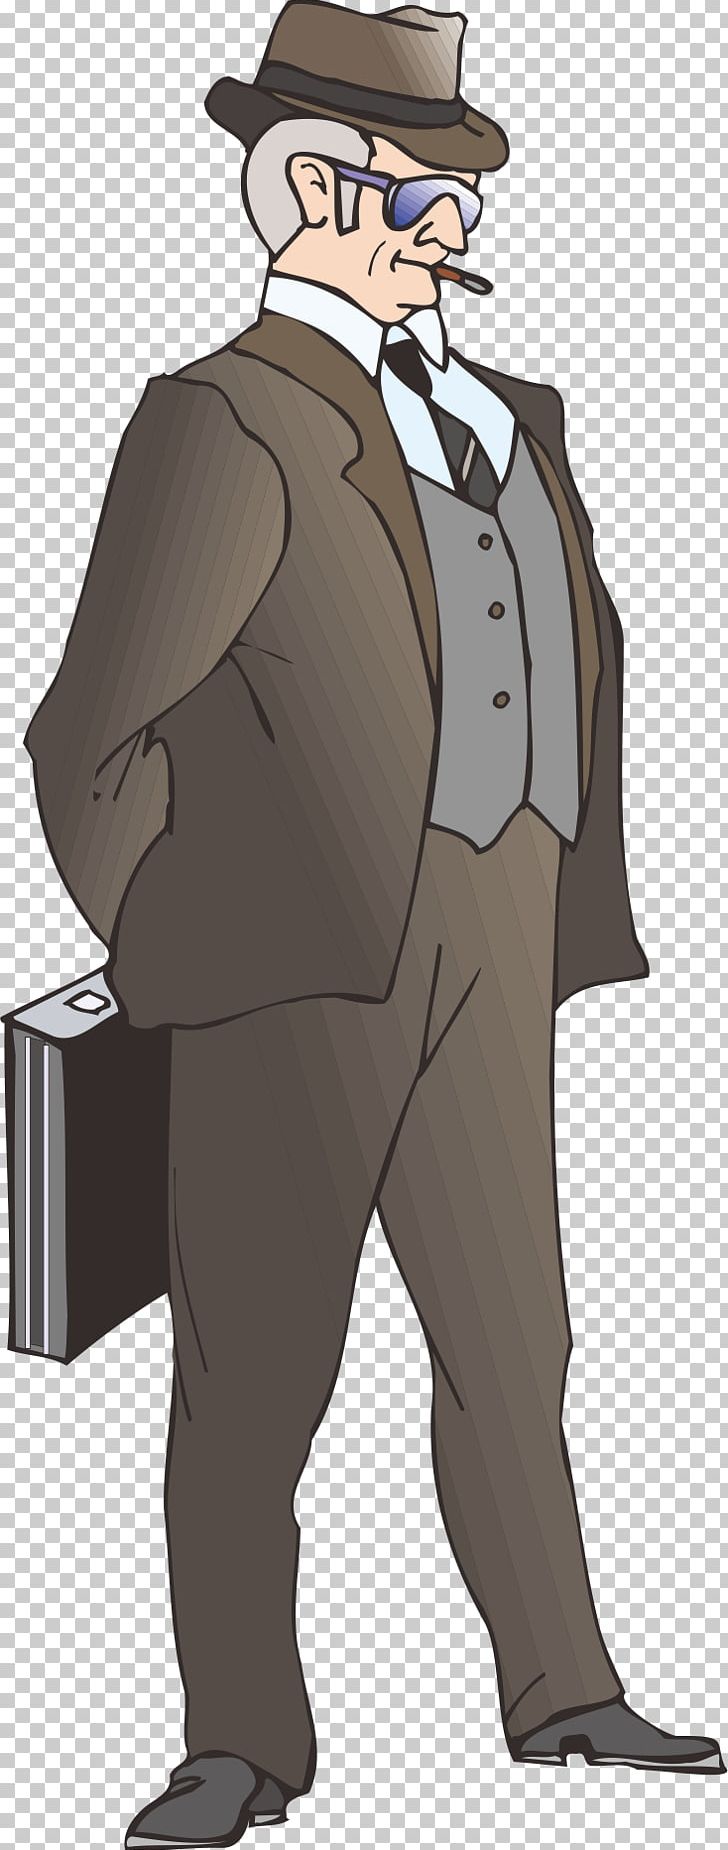 Cartoon Illustration PNG, Clipart, Animation, Art, Avatar, Business Man, Character Free PNG Download